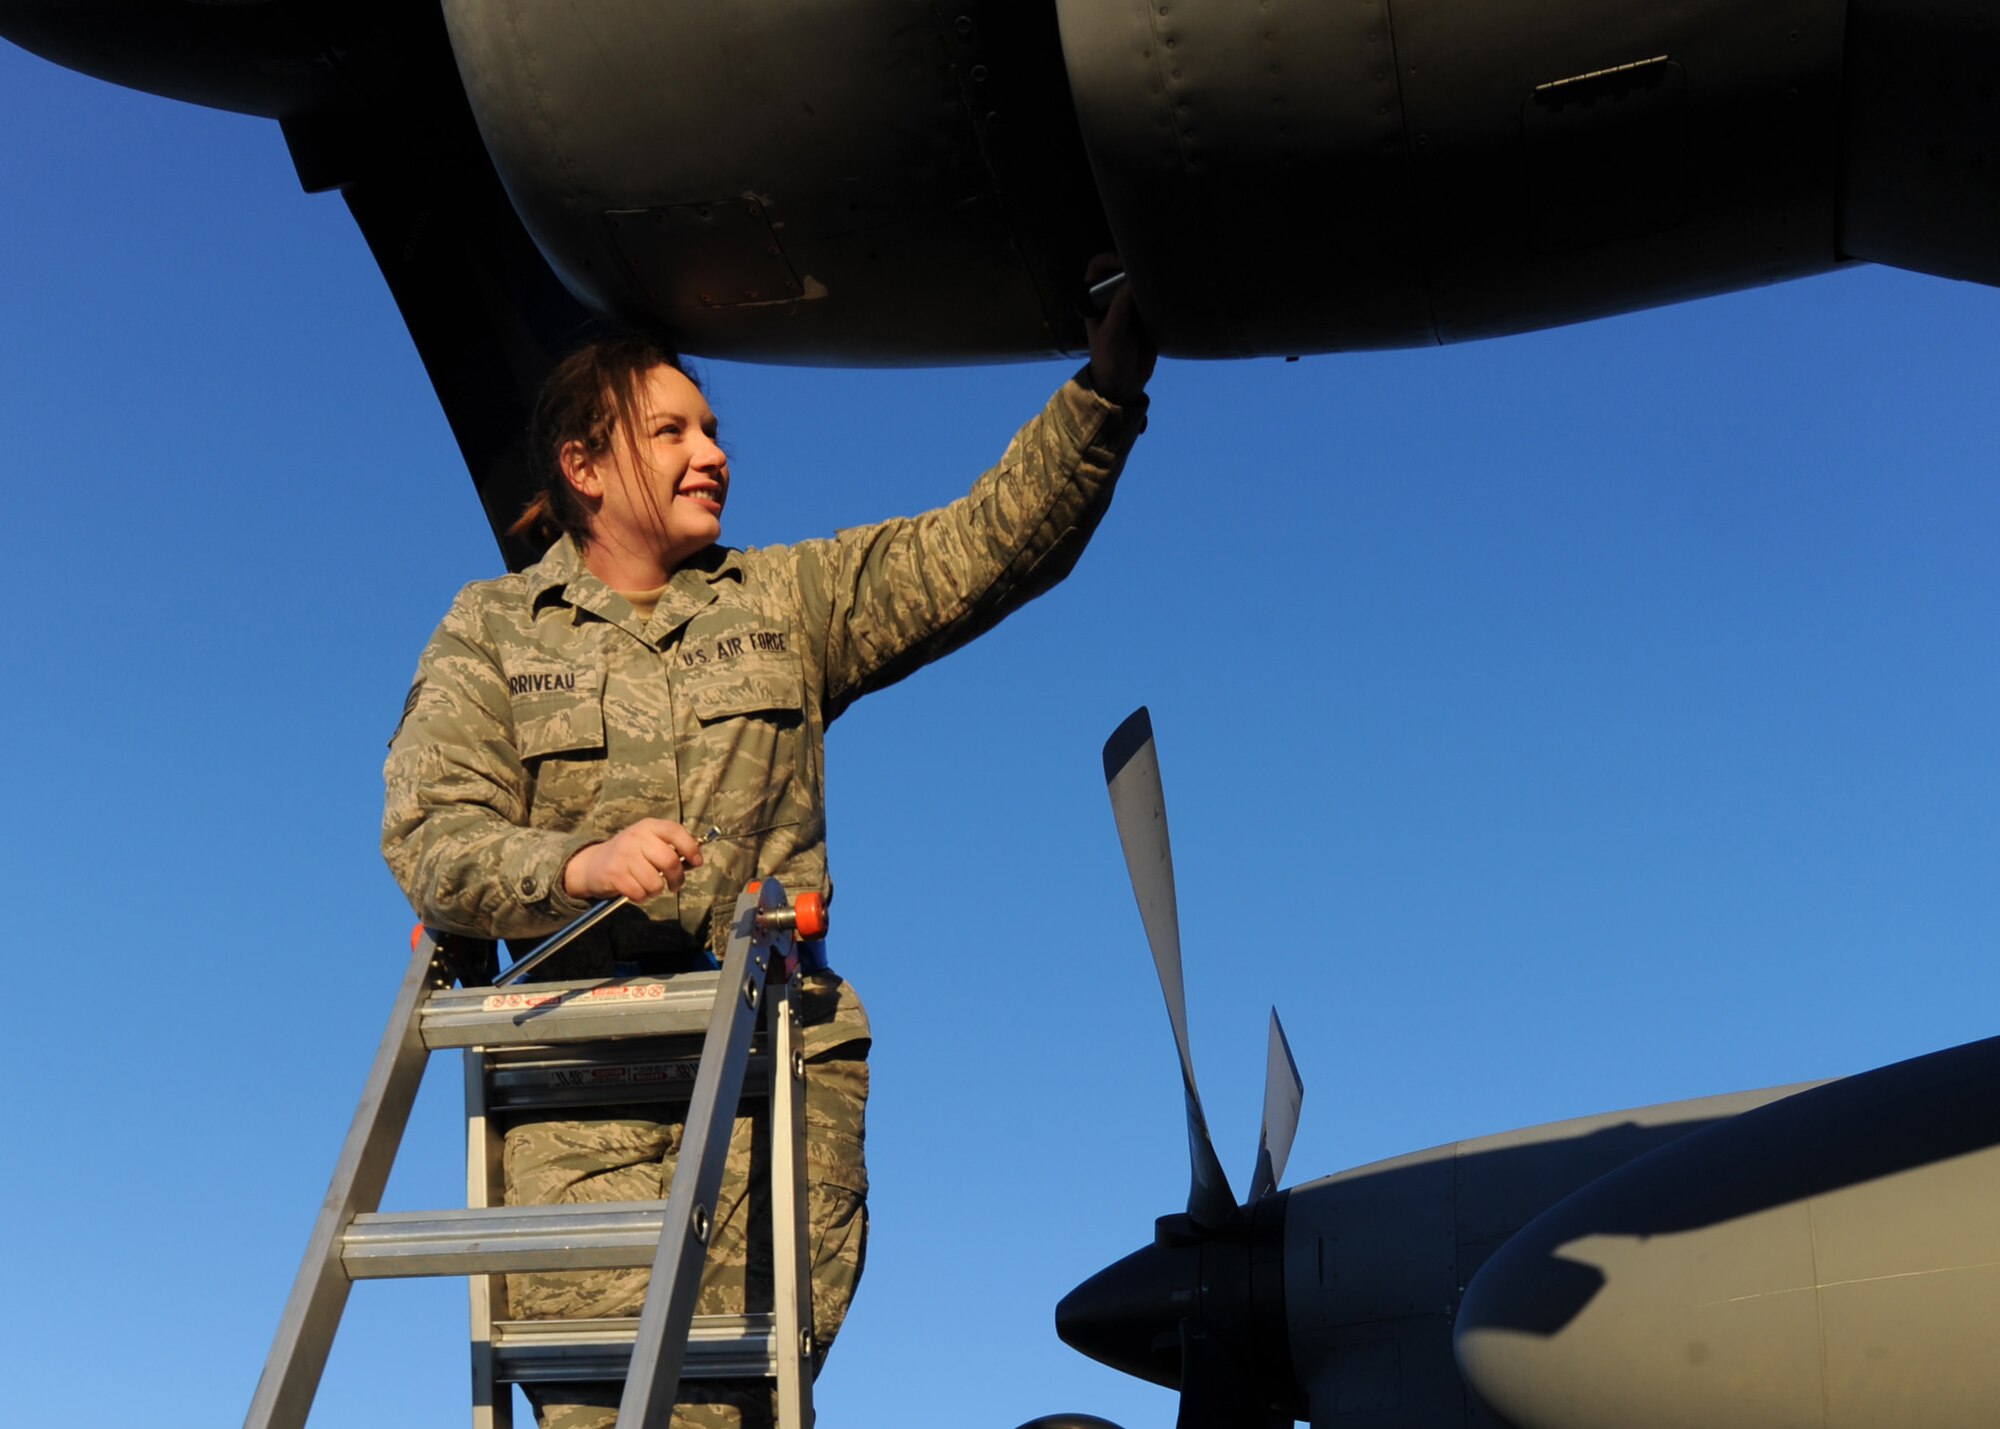 Senior Airman Jocelyn Corriveau, a crew chief with the 440th Aircraft Maintenance Squadron, inspects a C-130H aircraft engine intake for foreign objects and damage during routine maintenance at Pope Field, N.C., on Jan 21, 2011.  “[Being a mechanic] is fun,” said Airman Corriveau, “you get covered in grease, but nothing that won’t wash off.”Airman Corriveau is currently in “seasoning” training, where she receives hands-on experience in aircraft maintenance.  ( U.S. Air Force photo by Staff Sgt. Peter R. Miller)